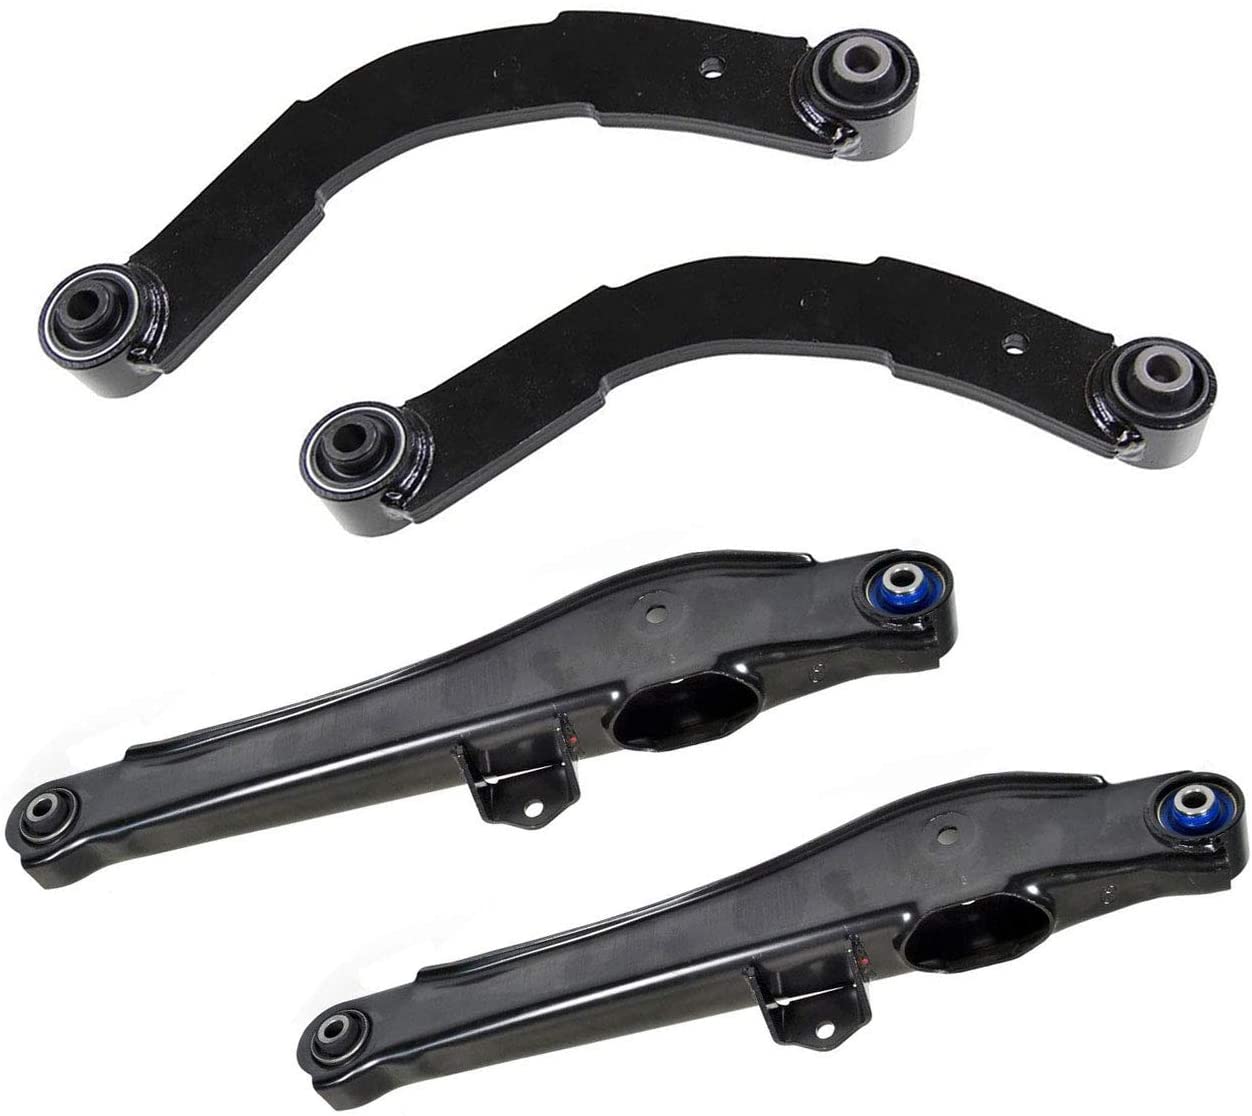 2x Rear Upper + 2x Rear Lower Control Arms for 2007